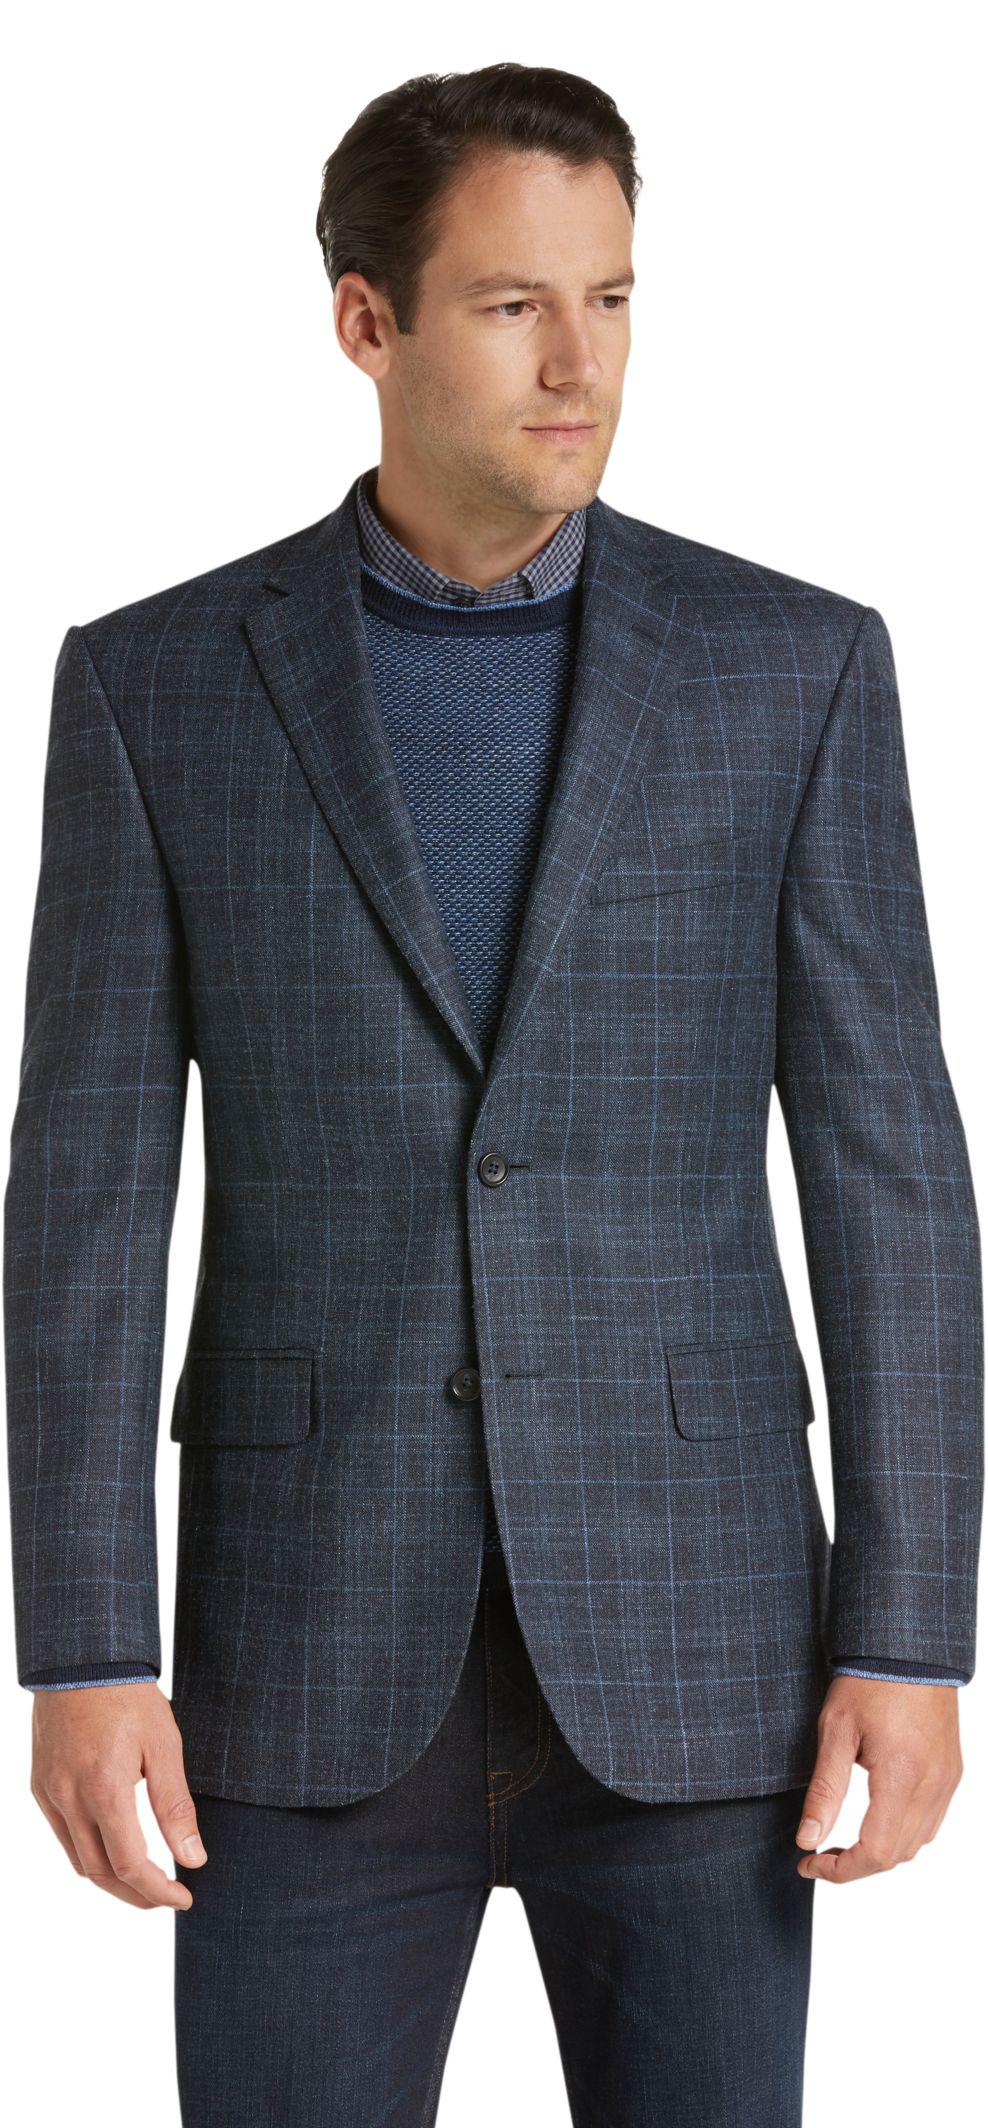 Lyst - Jos. A. Bank Signature Collection Tailored Fit Windowpane Plaid ...